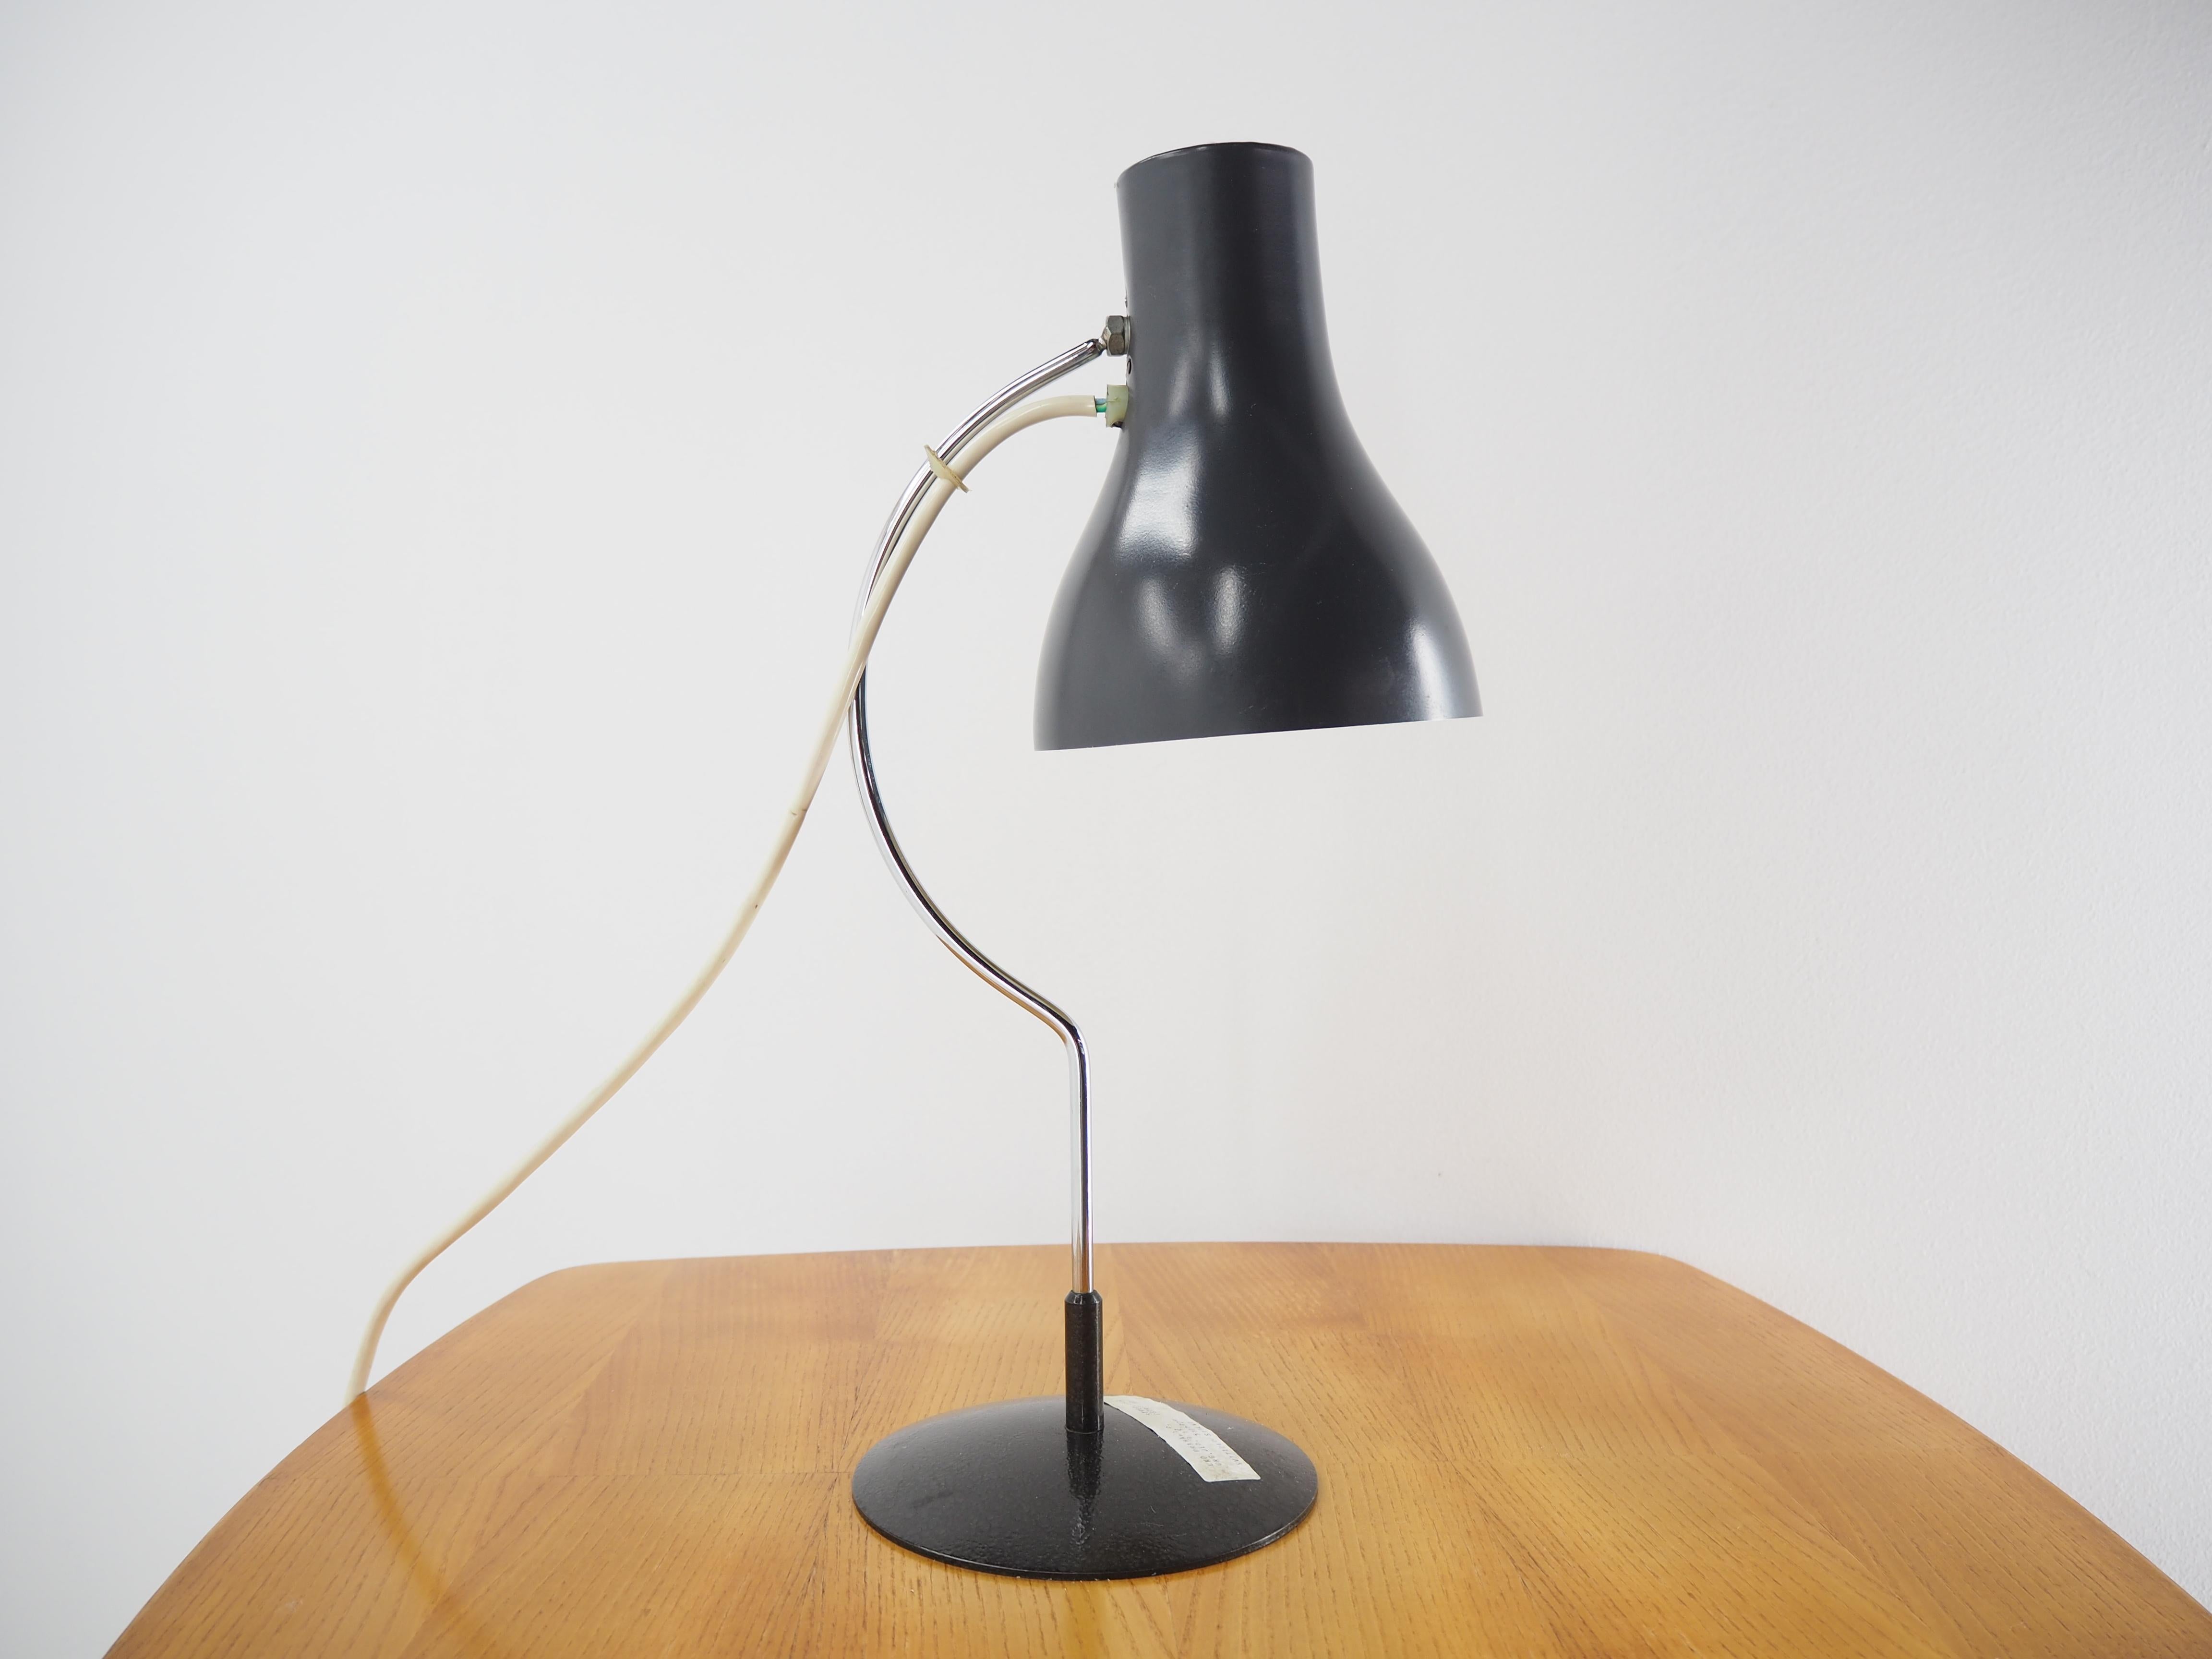 Mid-Century Modern Midcentury Table Lamp Designed by J. Hurka for Napako 1970s Type 0521